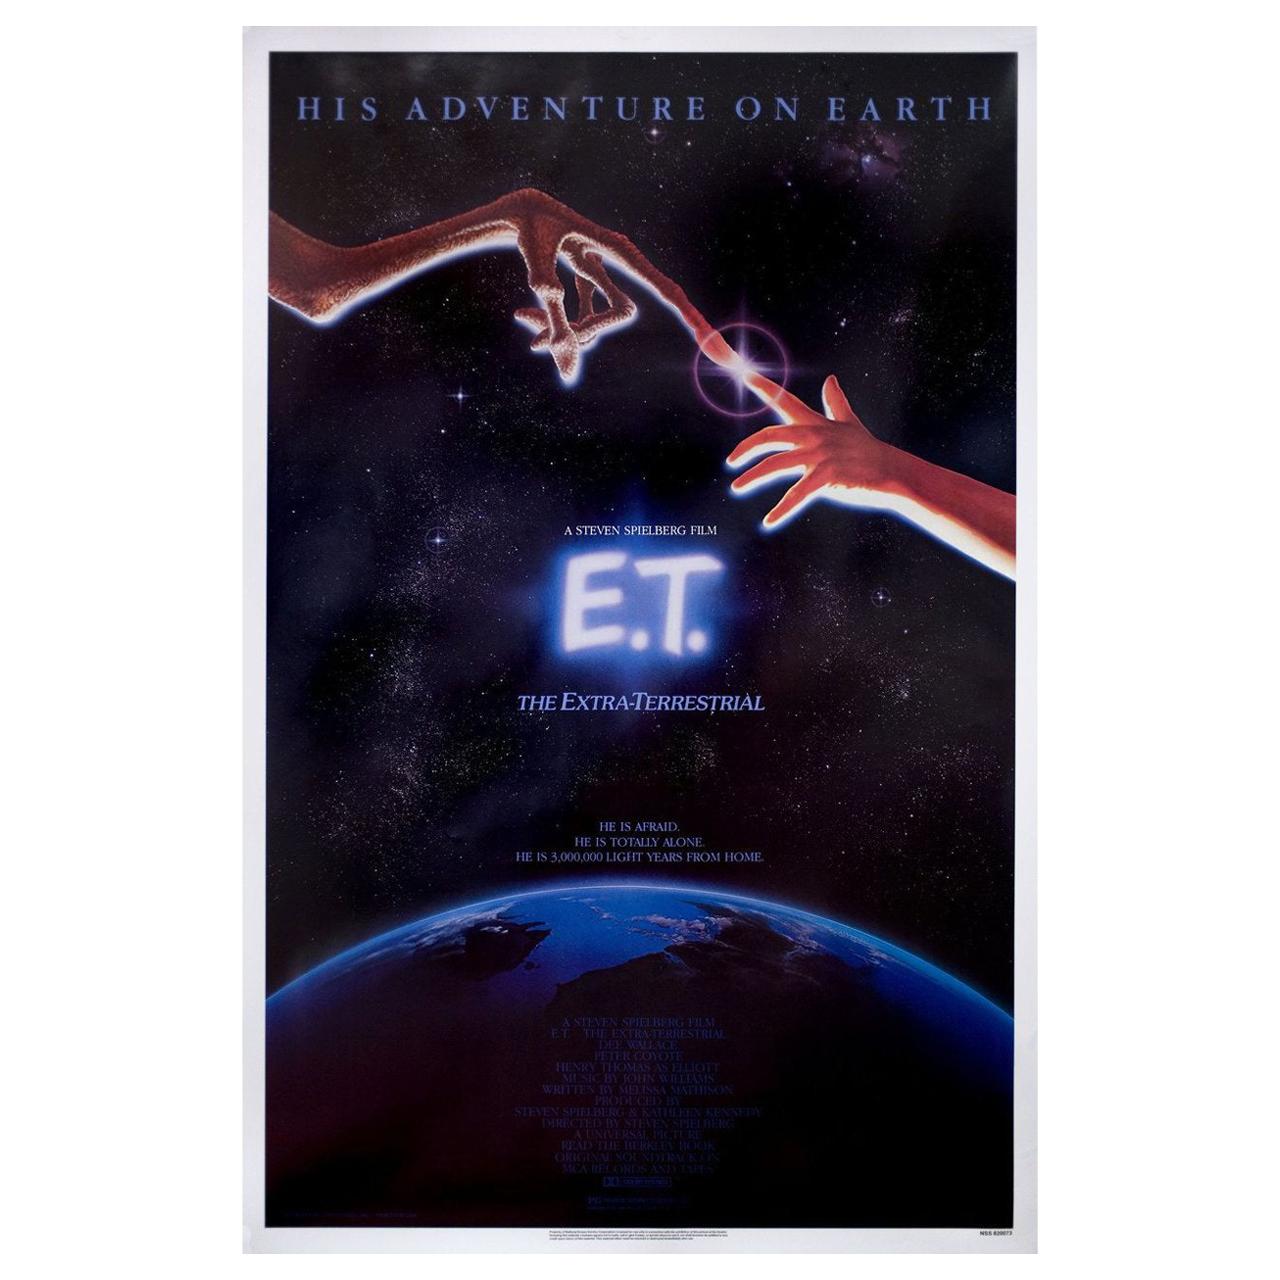 E.T. the Extra-Terrestrial 1982 U.S. One Sheet Film Poster